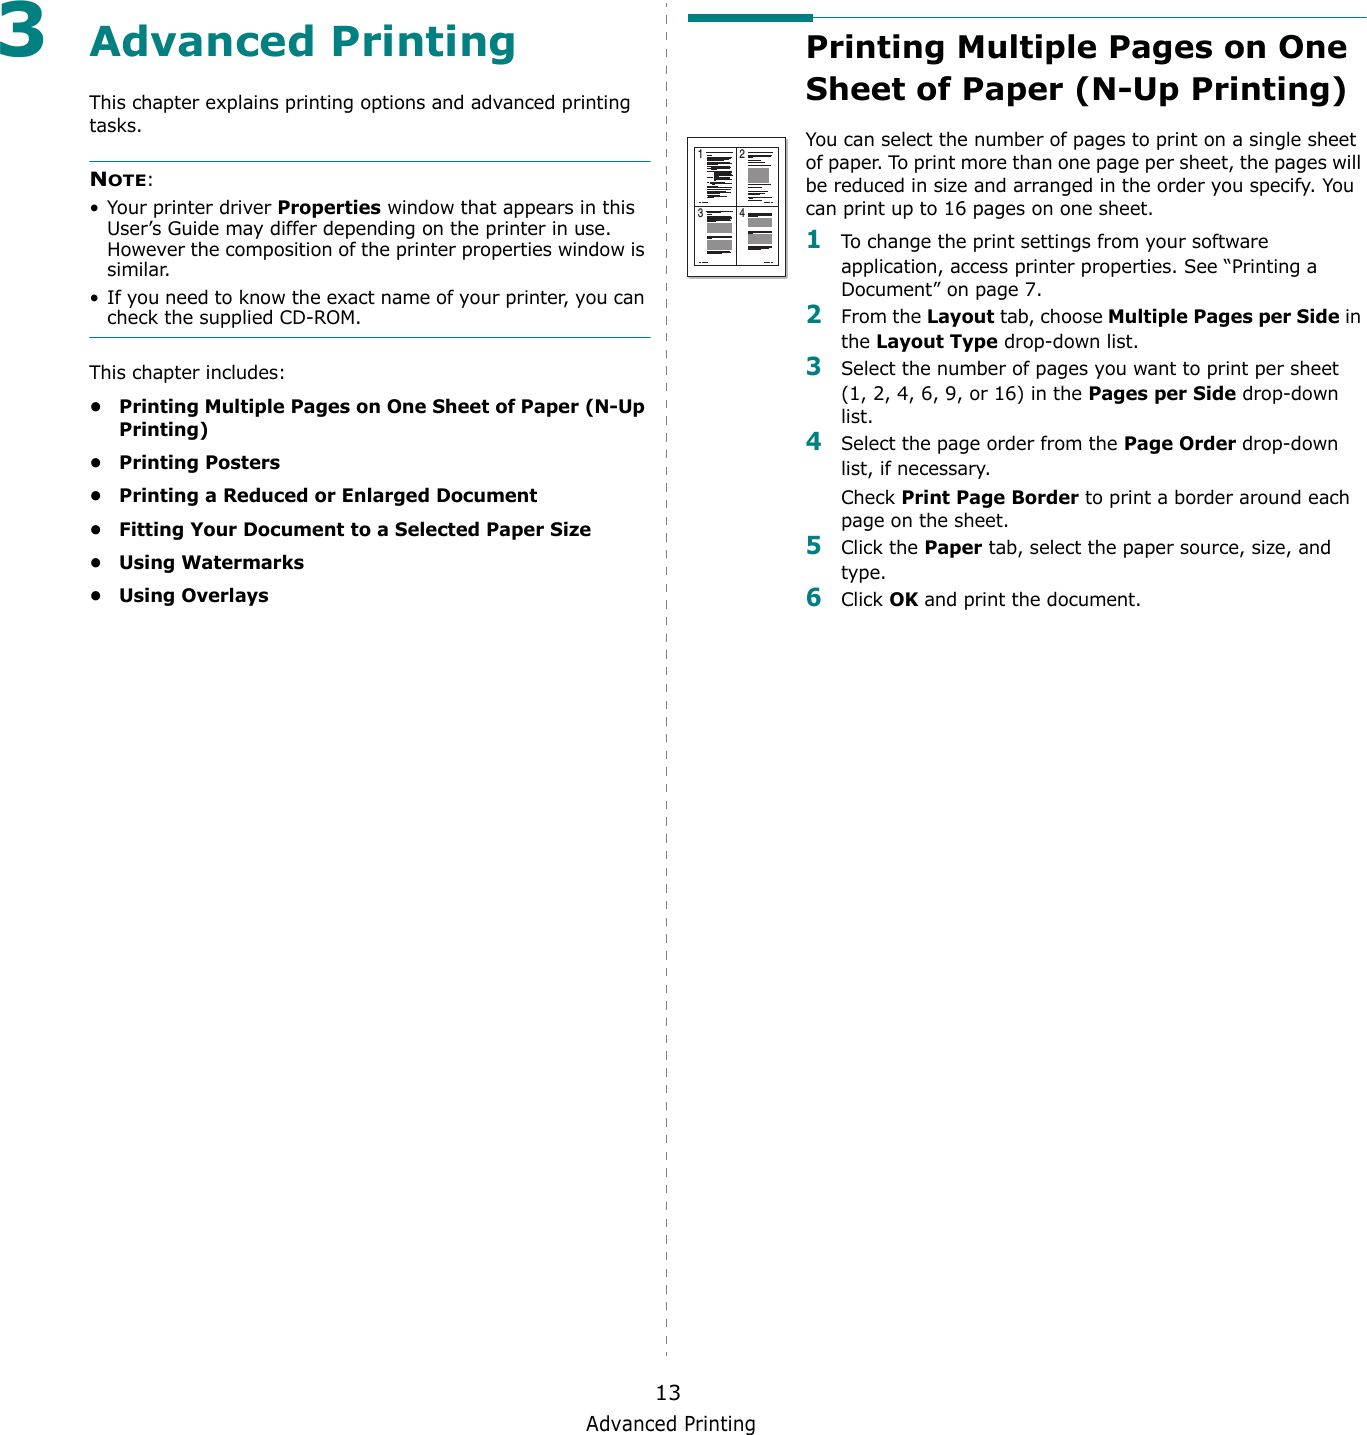 Advanced Printing133Advanced PrintingThis chapter explains printing options and advanced printing tasks. NOTE: • Your printer driver Properties window that appears in this User’s Guide may differ depending on the printer in use. However the composition of the printer properties window is similar.• If you need to know the exact name of your printer, you can check the supplied CD-ROM.This chapter includes:• Printing Multiple Pages on One Sheet of Paper (N-Up Printing)•Printing Posters• Printing a Reduced or Enlarged Document• Fitting Your Document to a Selected Paper Size•Using Watermarks•Using OverlaysPrinting Multiple Pages on One Sheet of Paper (N-Up Printing) You can select the number of pages to print on a single sheet of paper. To print more than one page per sheet, the pages will be reduced in size and arranged in the order you specify. You can print up to 16 pages on one sheet.  1To change the print settings from your software application, access printer properties. See “Printing a Document” on page 7.2From the Layout tab, choose Multiple Pages per Side in the Layout Type drop-down list. 3Select the number of pages you want to print per sheet (1, 2, 4, 6, 9, or 16) in the Pages per Side drop-down list.4Select the page order from the Page Order drop-down list, if necessary. Check Print Page Border to print a border around each page on the sheet. 5Click the Paper tab, select the paper source, size, and type.6Click OK and print the document. 1 23 4